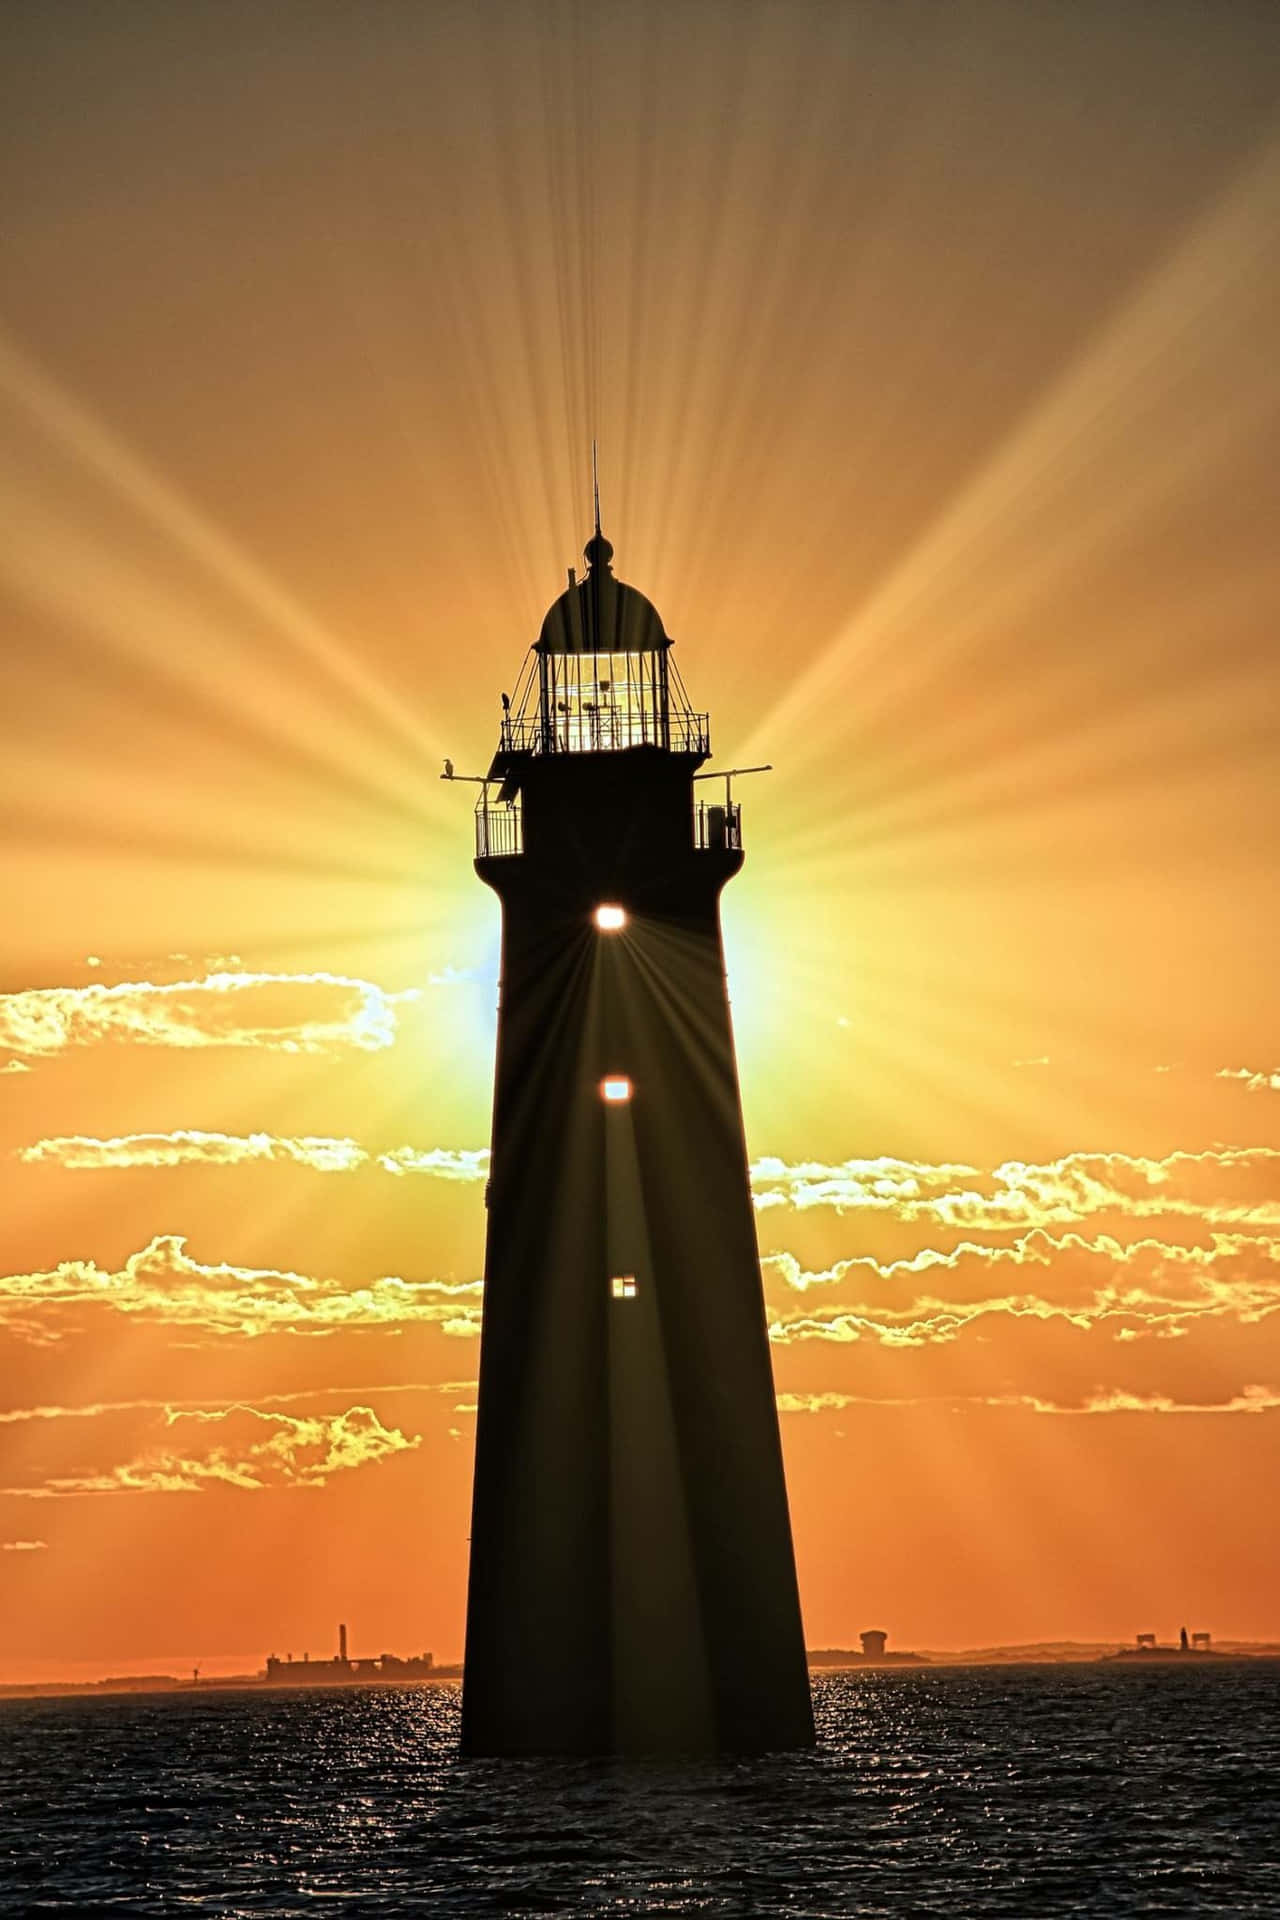 Standing tall and strong, the Lighthouse shines a beacon of light